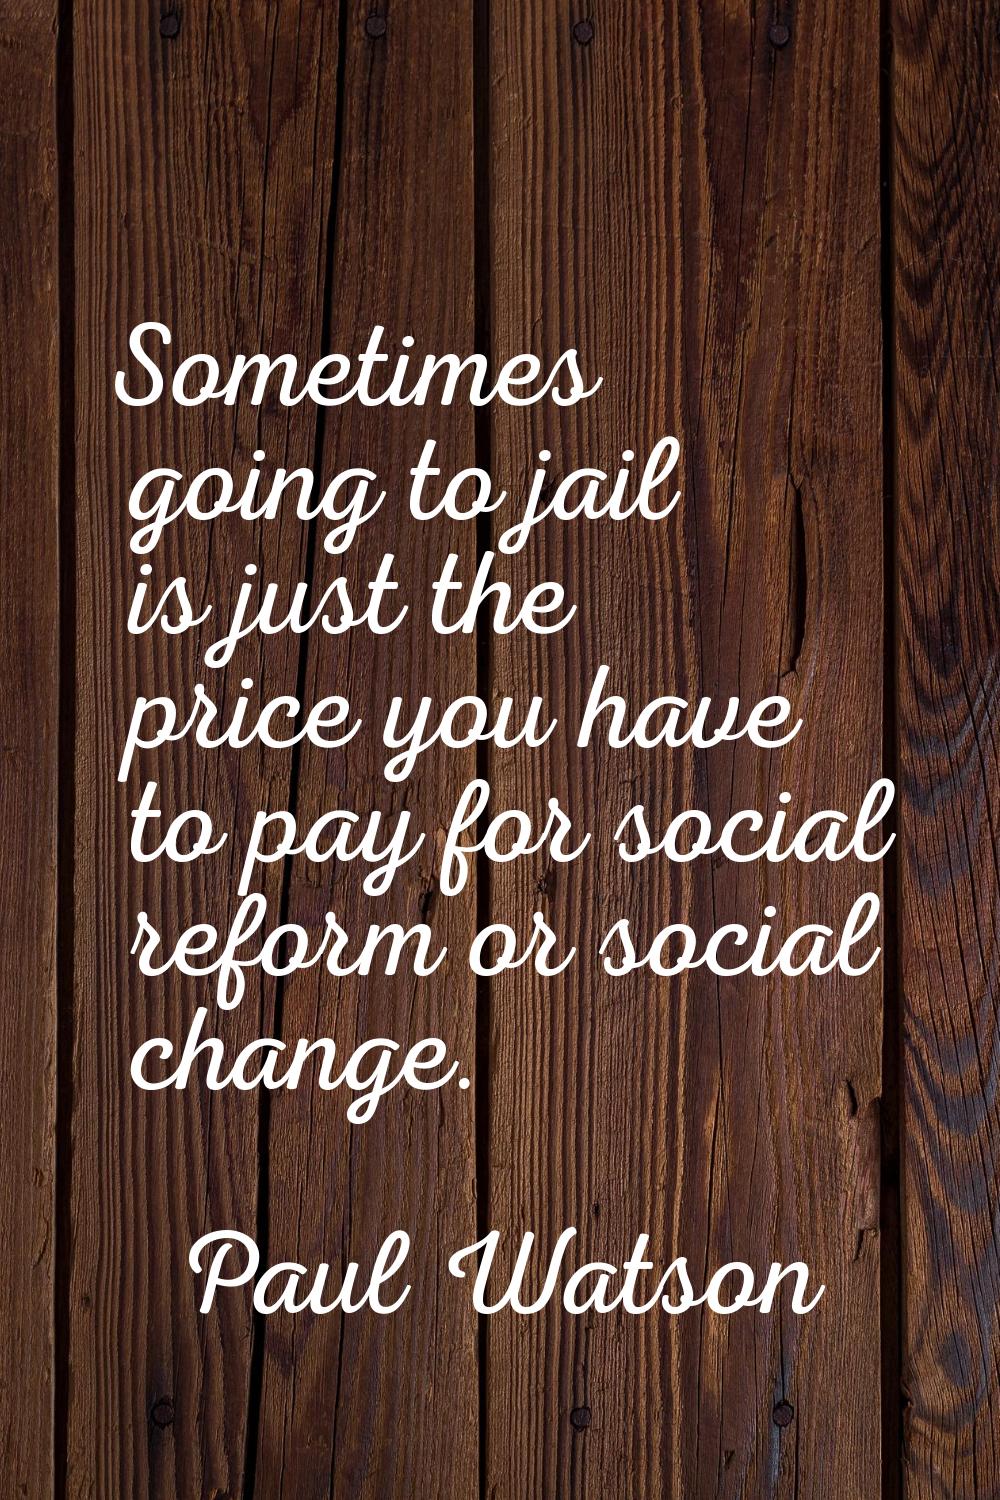 Sometimes going to jail is just the price you have to pay for social reform or social change.